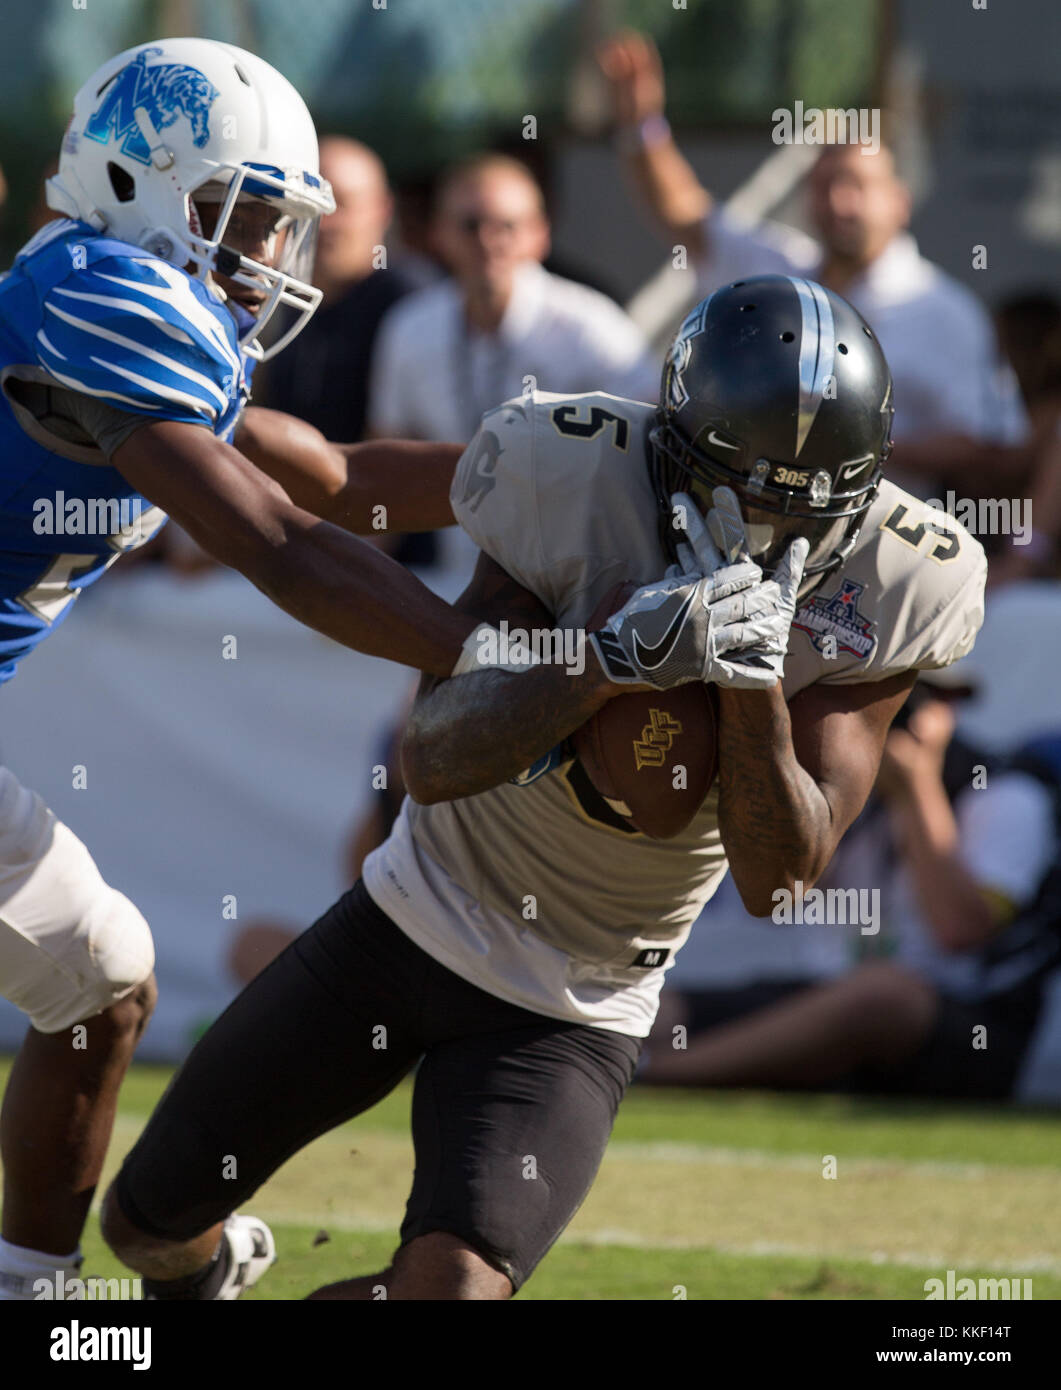 Orlando, FL, USA. 2nd Dec, 2017. UCF's Dredrick Snelson #5 cathes a pass for a touchdown during the AAC Championship football game between the UCF Knights and the Memphis Tigers at the Spectrum Stadium in Orlando, FL. Kyle Okita/CSM/Alamy Live News Stock Photo